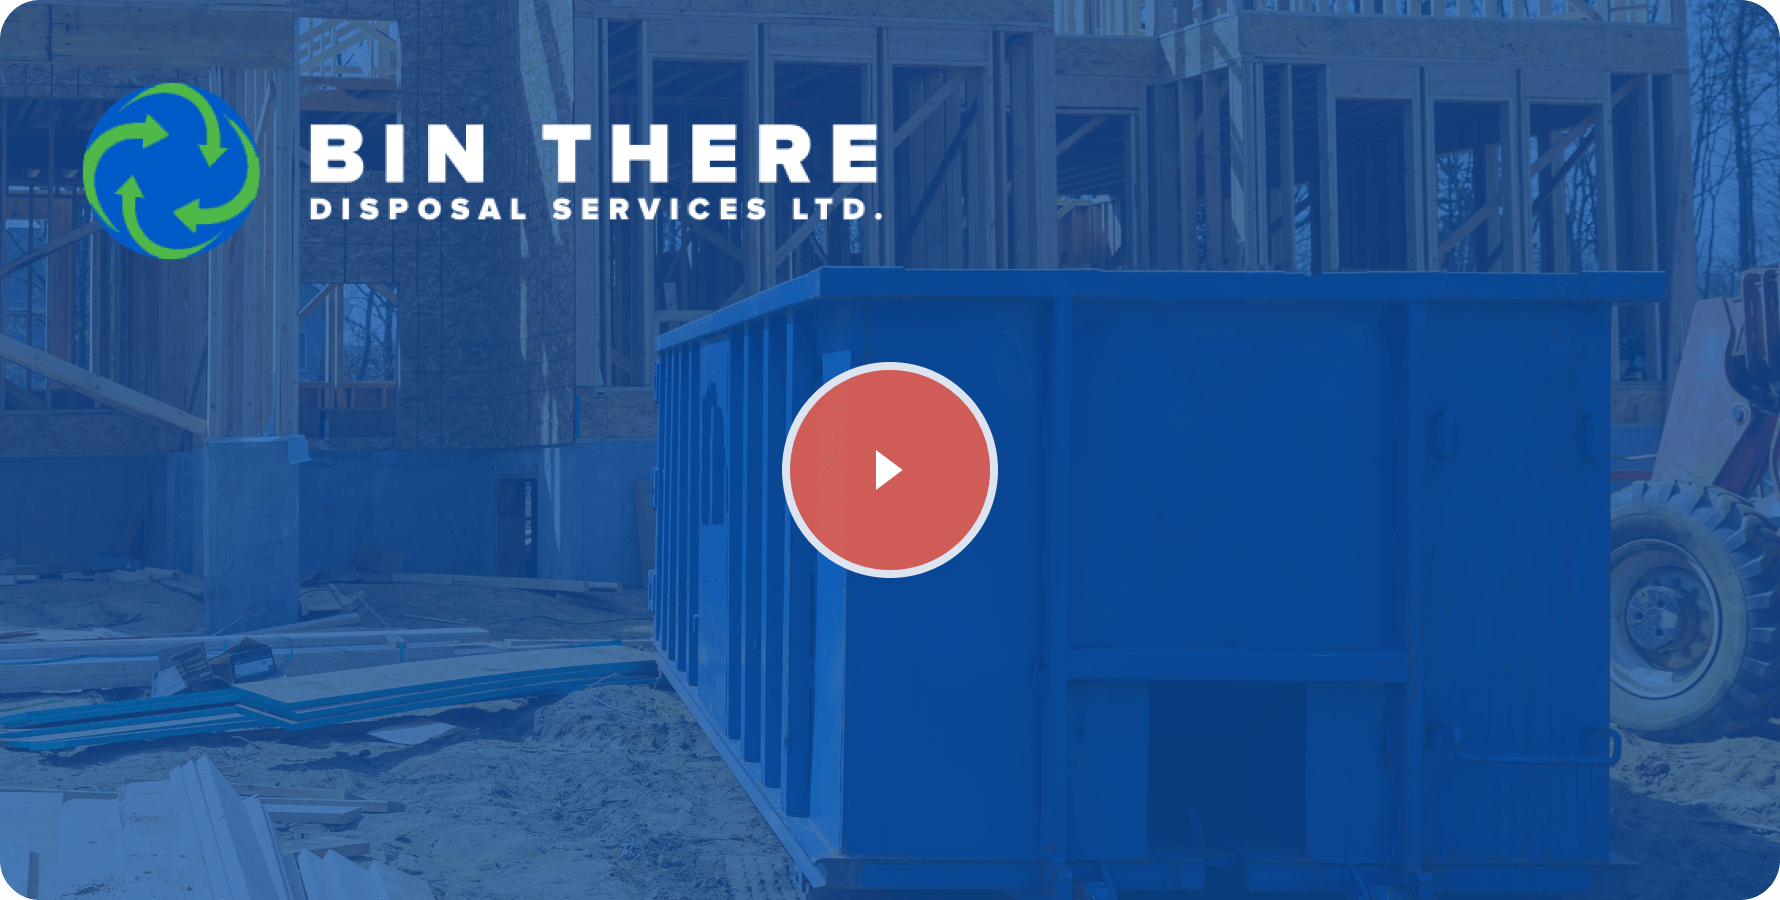 Bin There Disposal Services Ltd. gives a testimonial on their service with OneLocal.